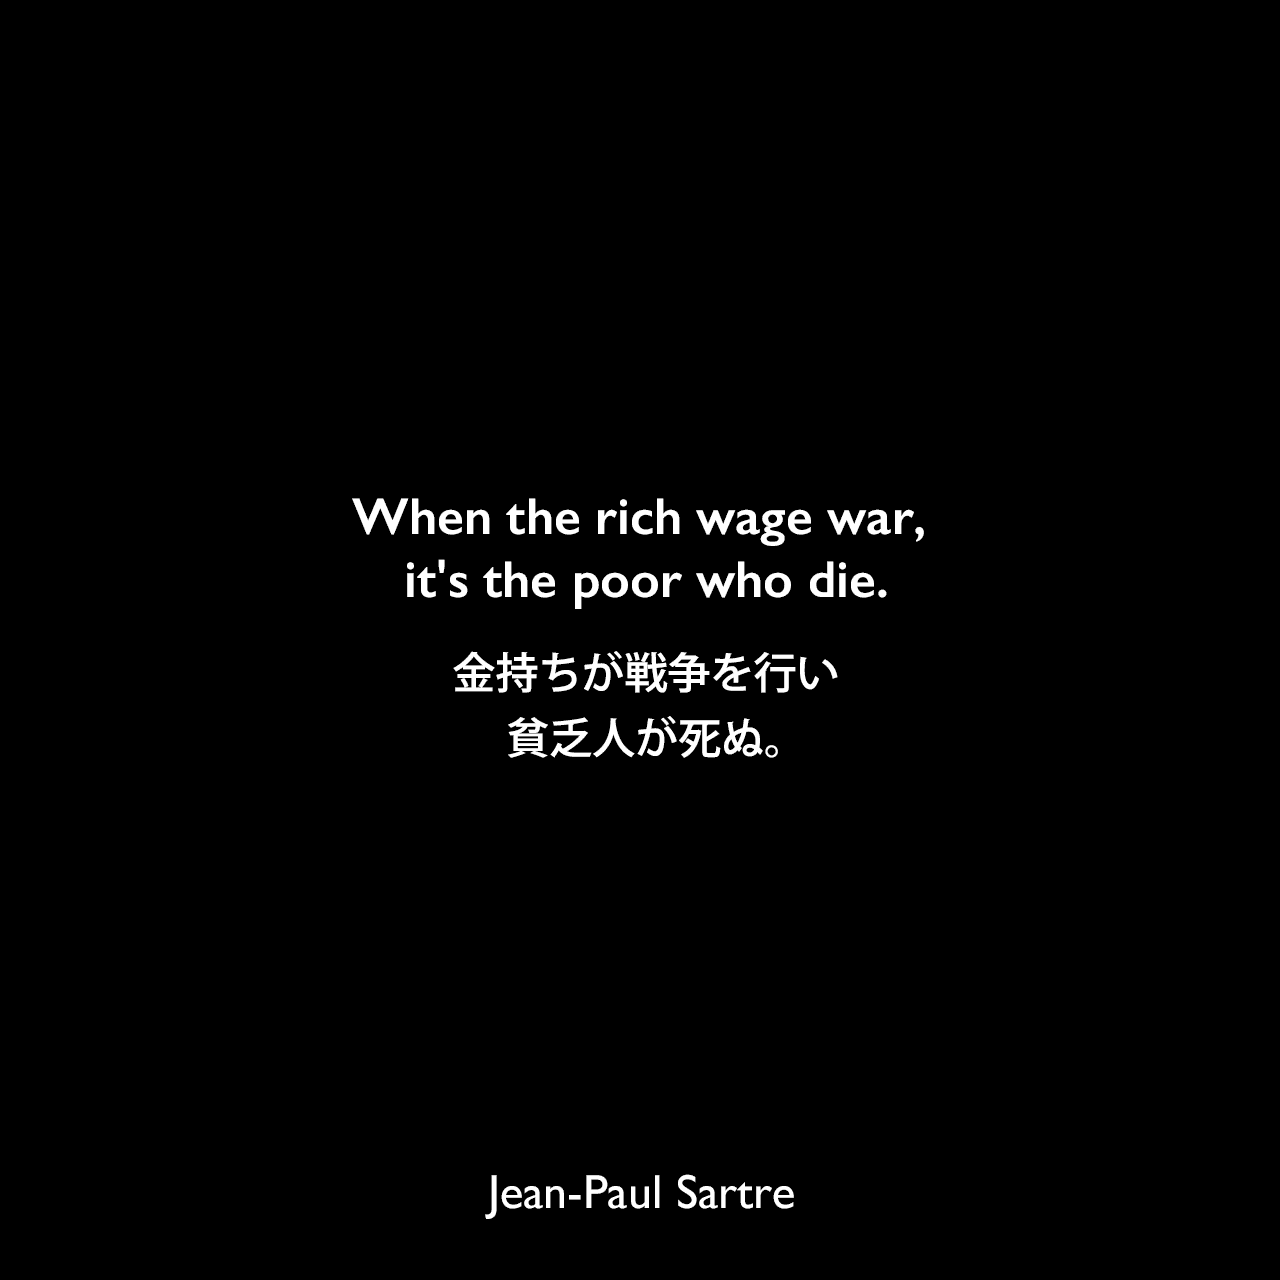 When the rich wage war, it's the poor who die.金持ちが戦争を行い、貧乏人が死ぬ。Jean-Paul Sartre